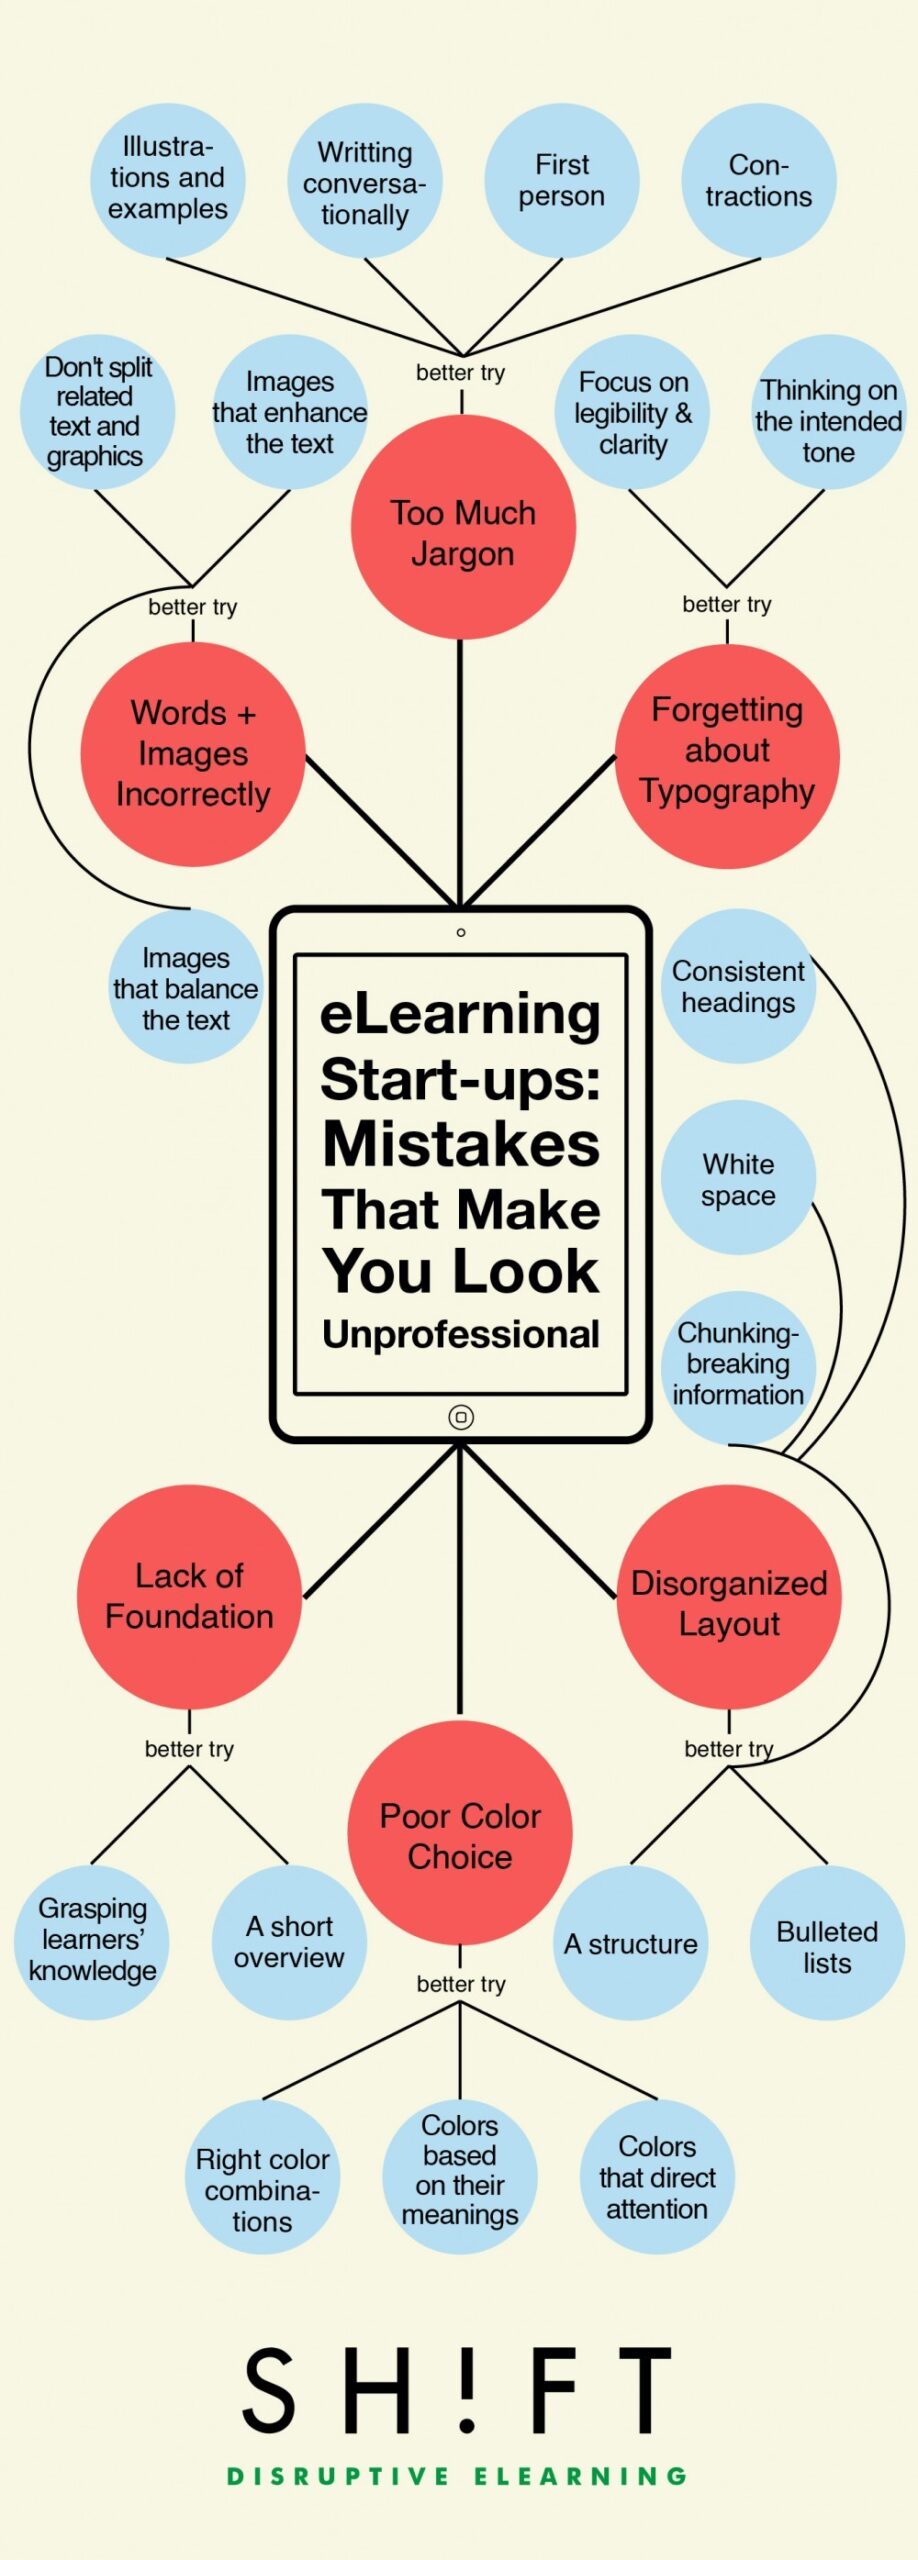 eLearning-Startup-Mistakes-v4-011